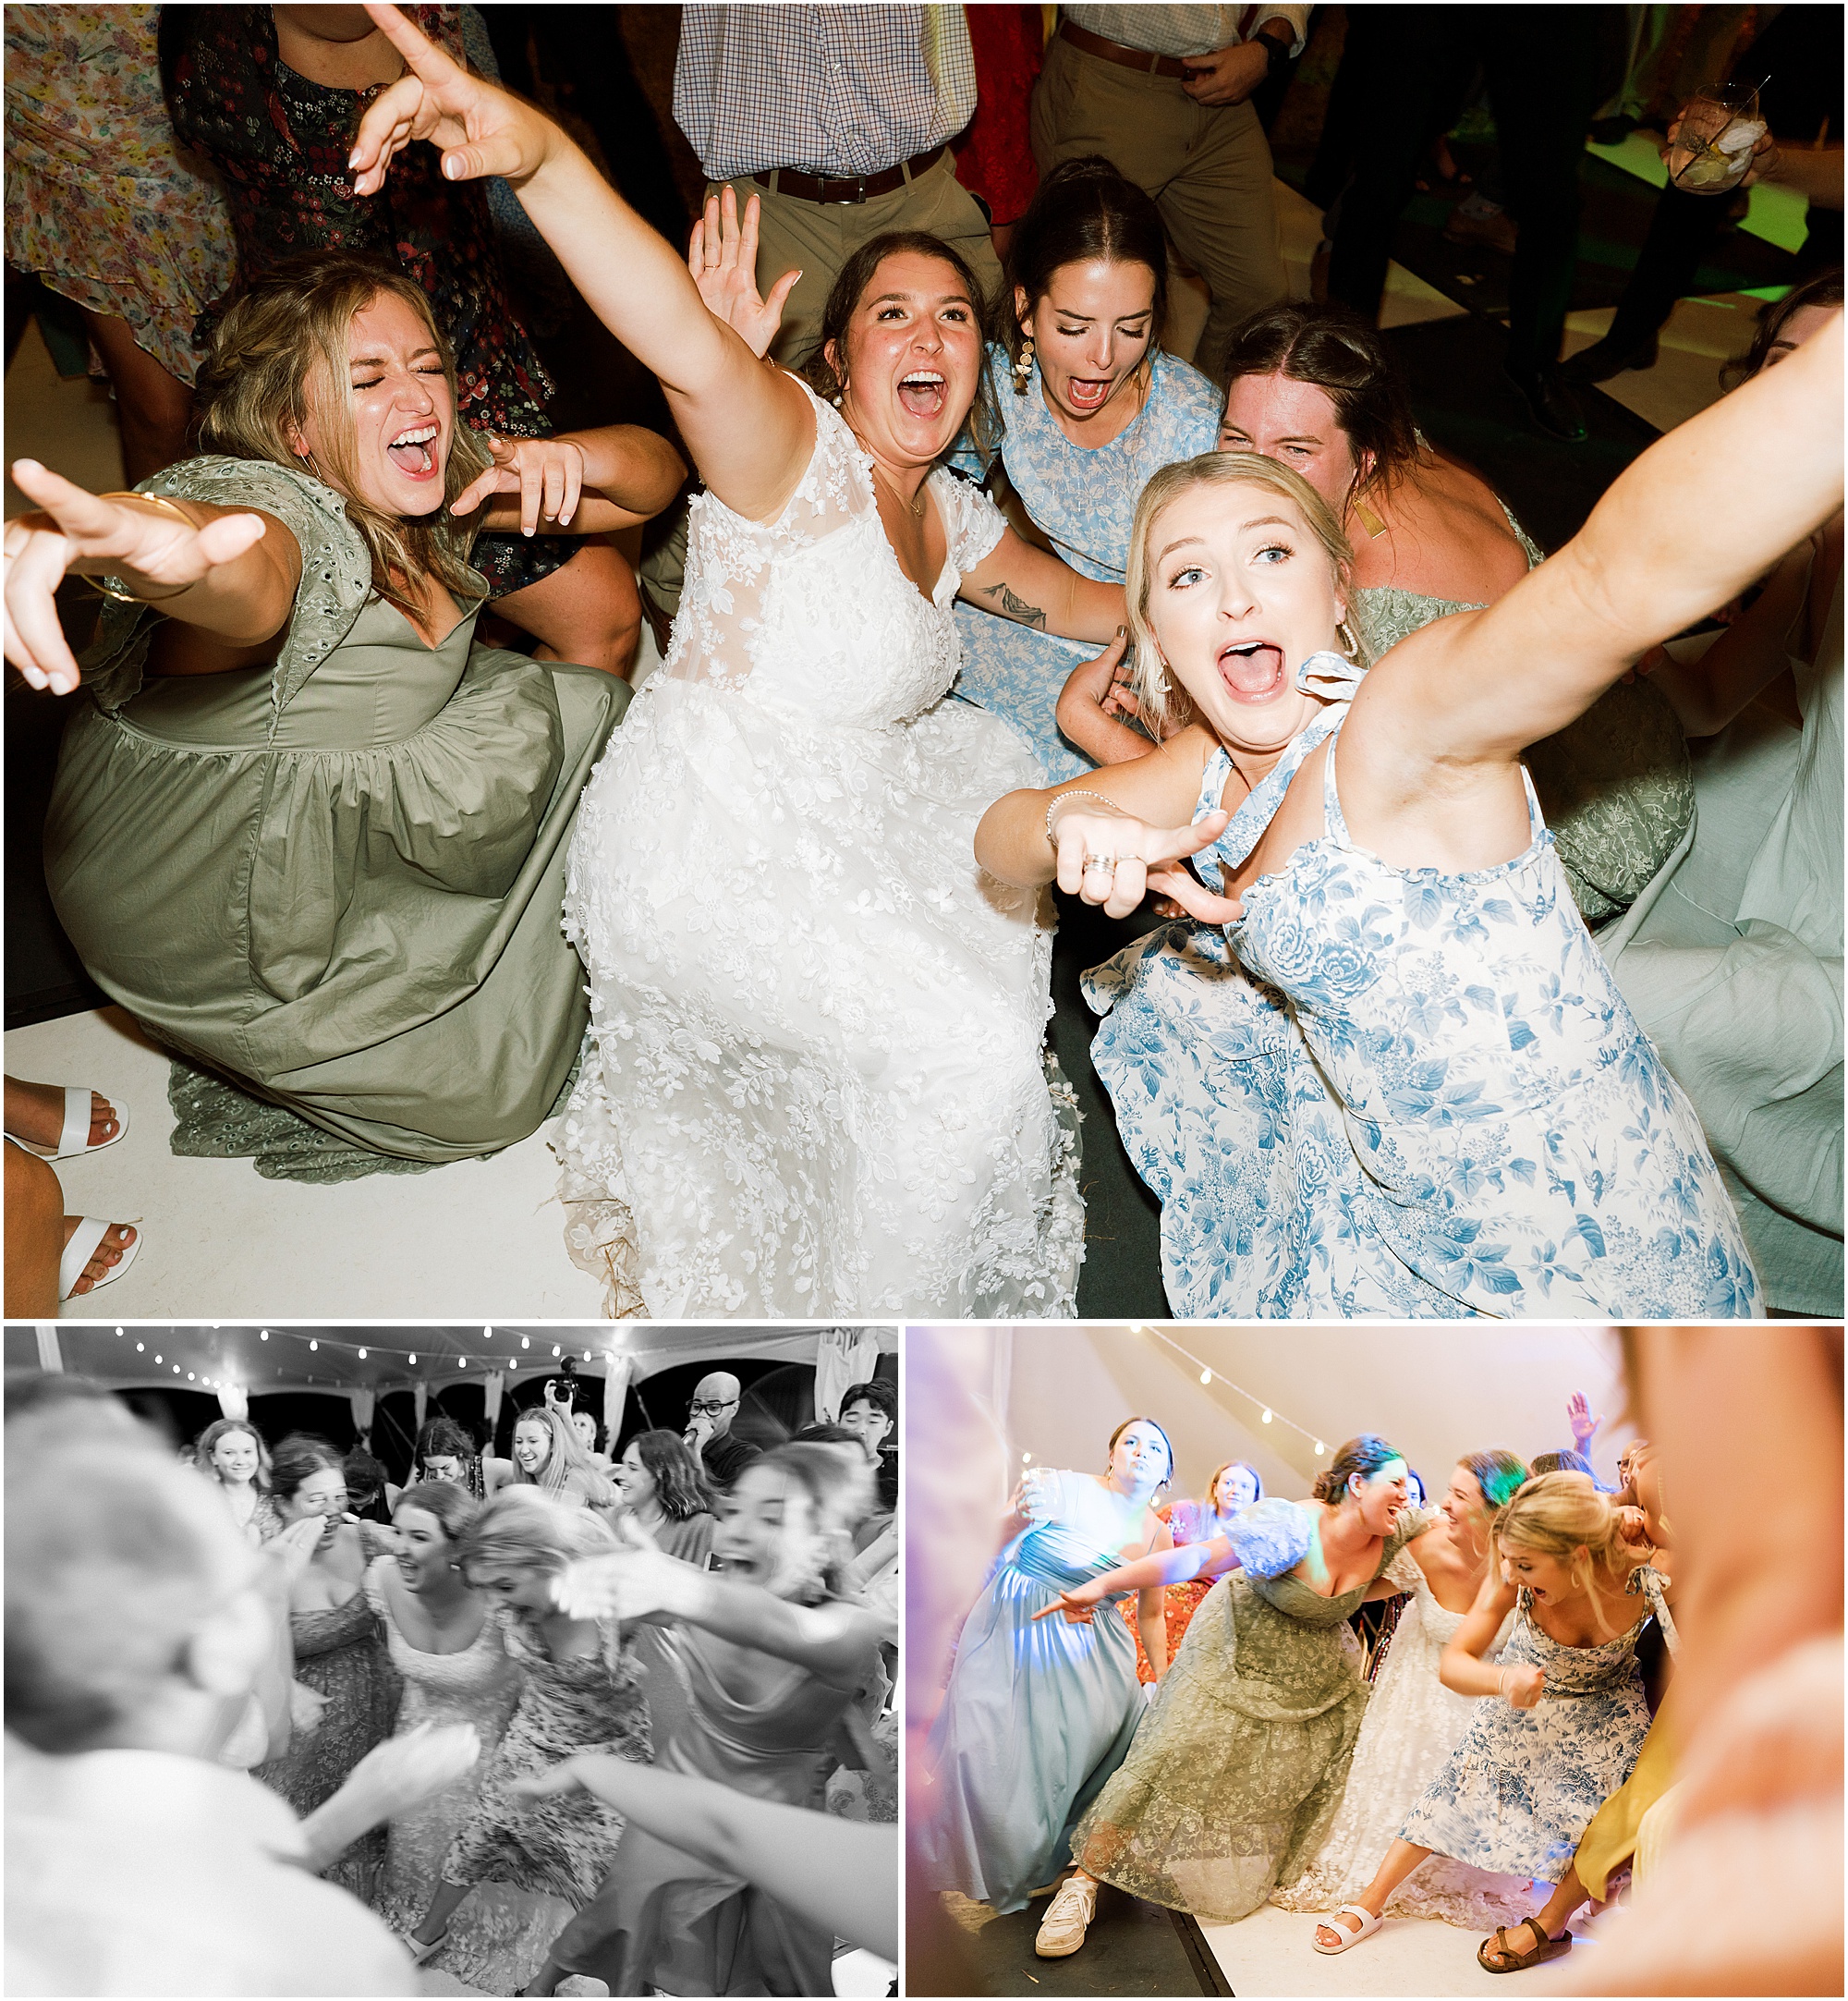 Wedding reception with a wild dance party. Bridesmaids and bride dancing at wedding reception.